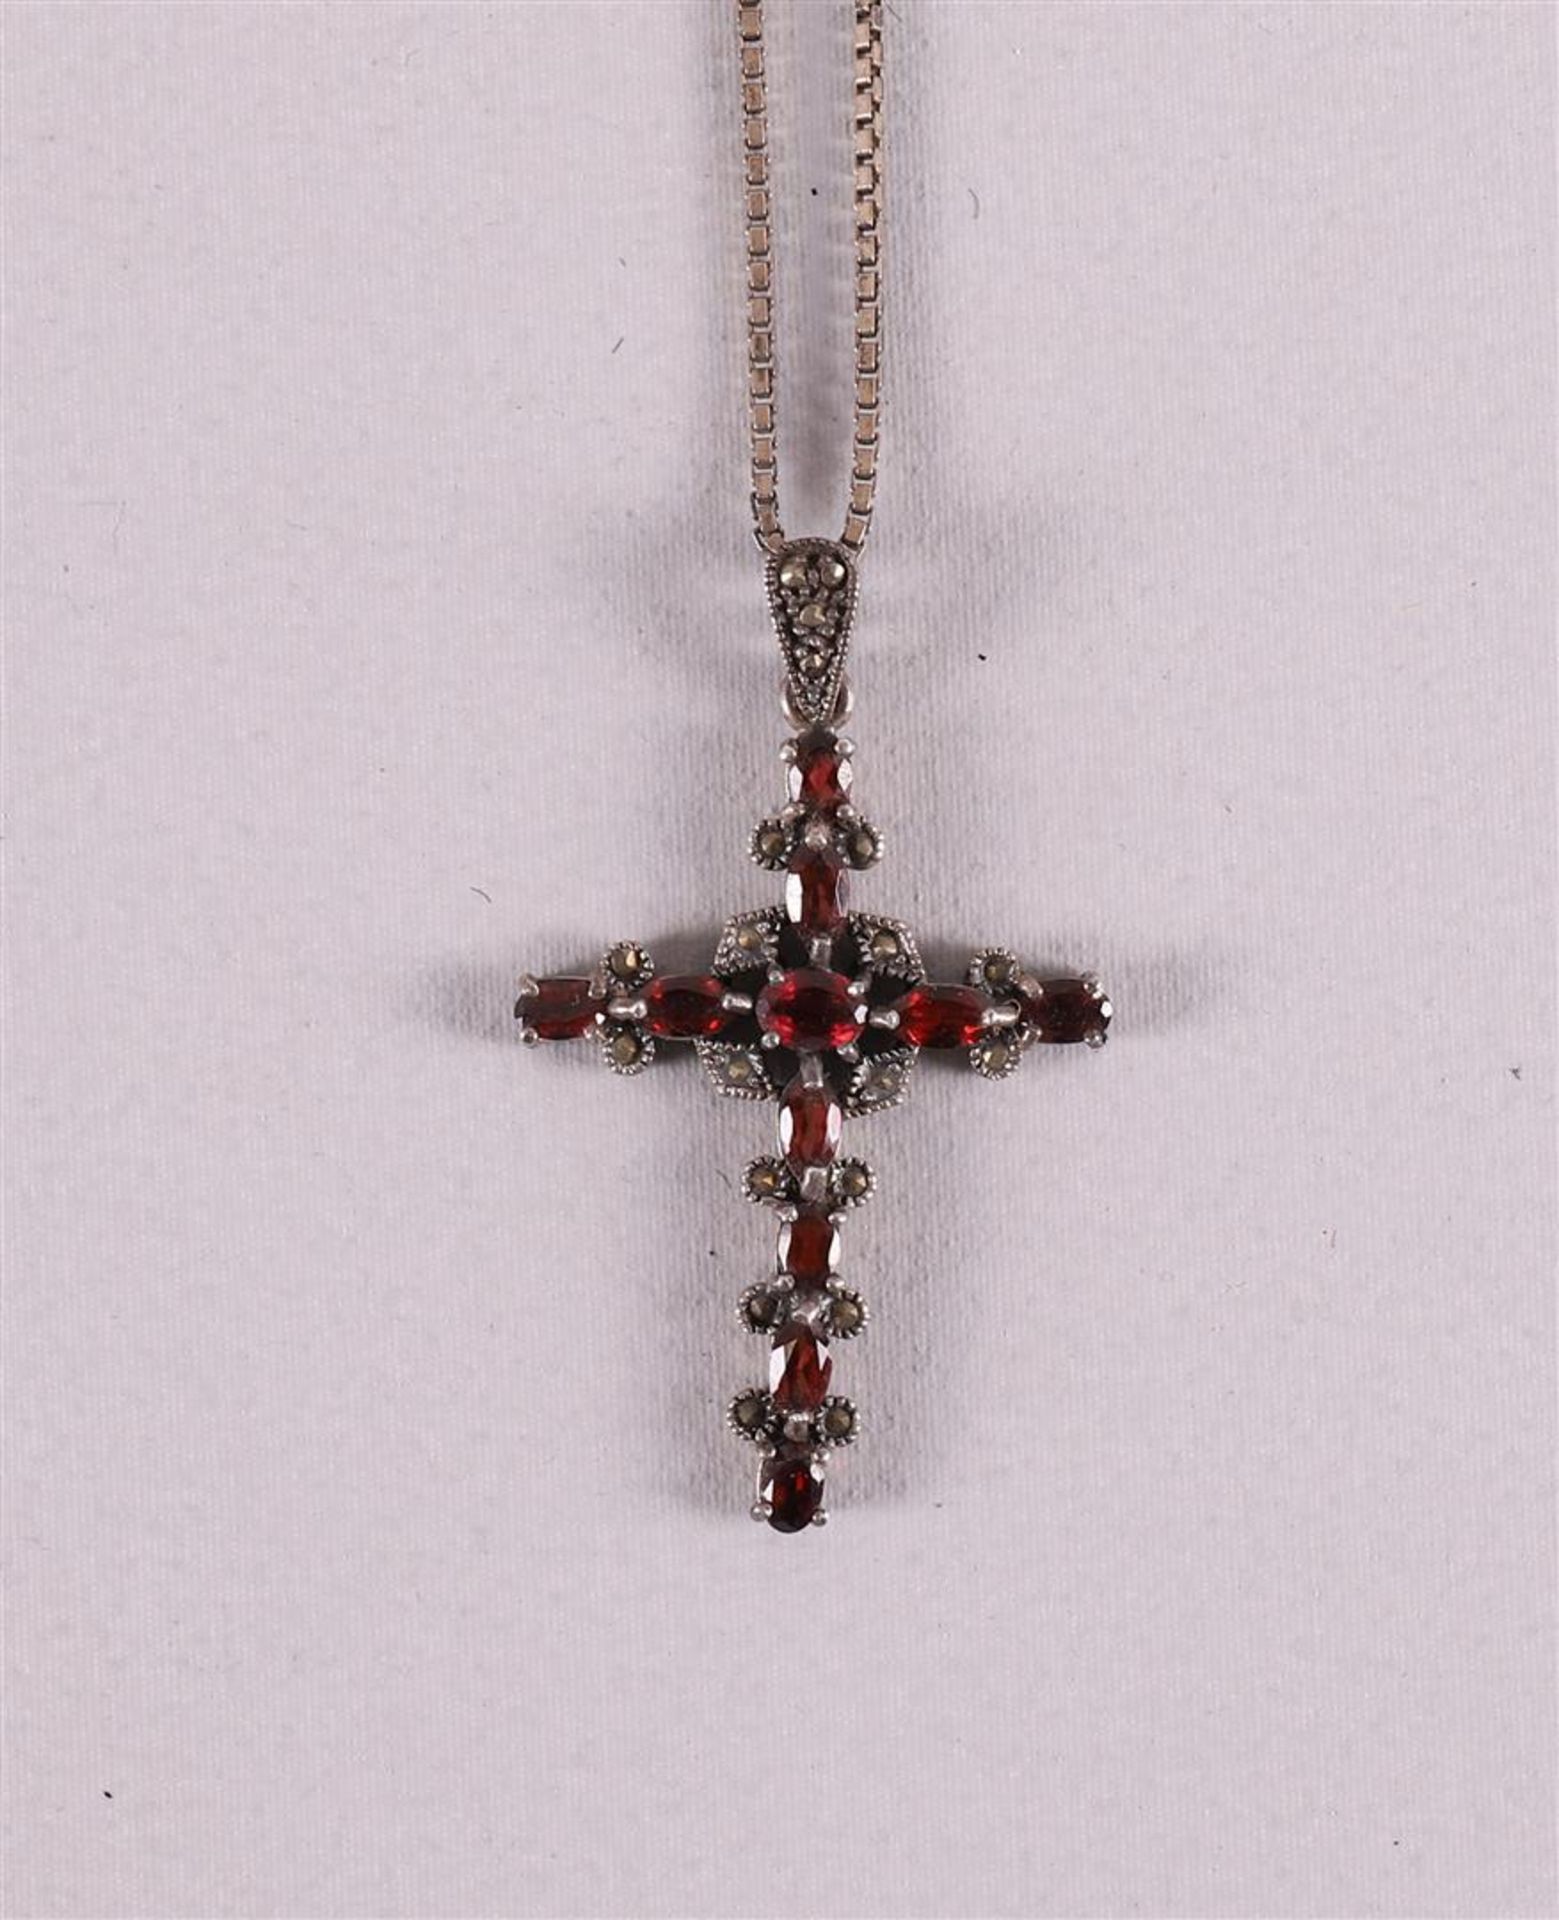 A silver necklace on a ditto silver cross pendant, set with garnets.